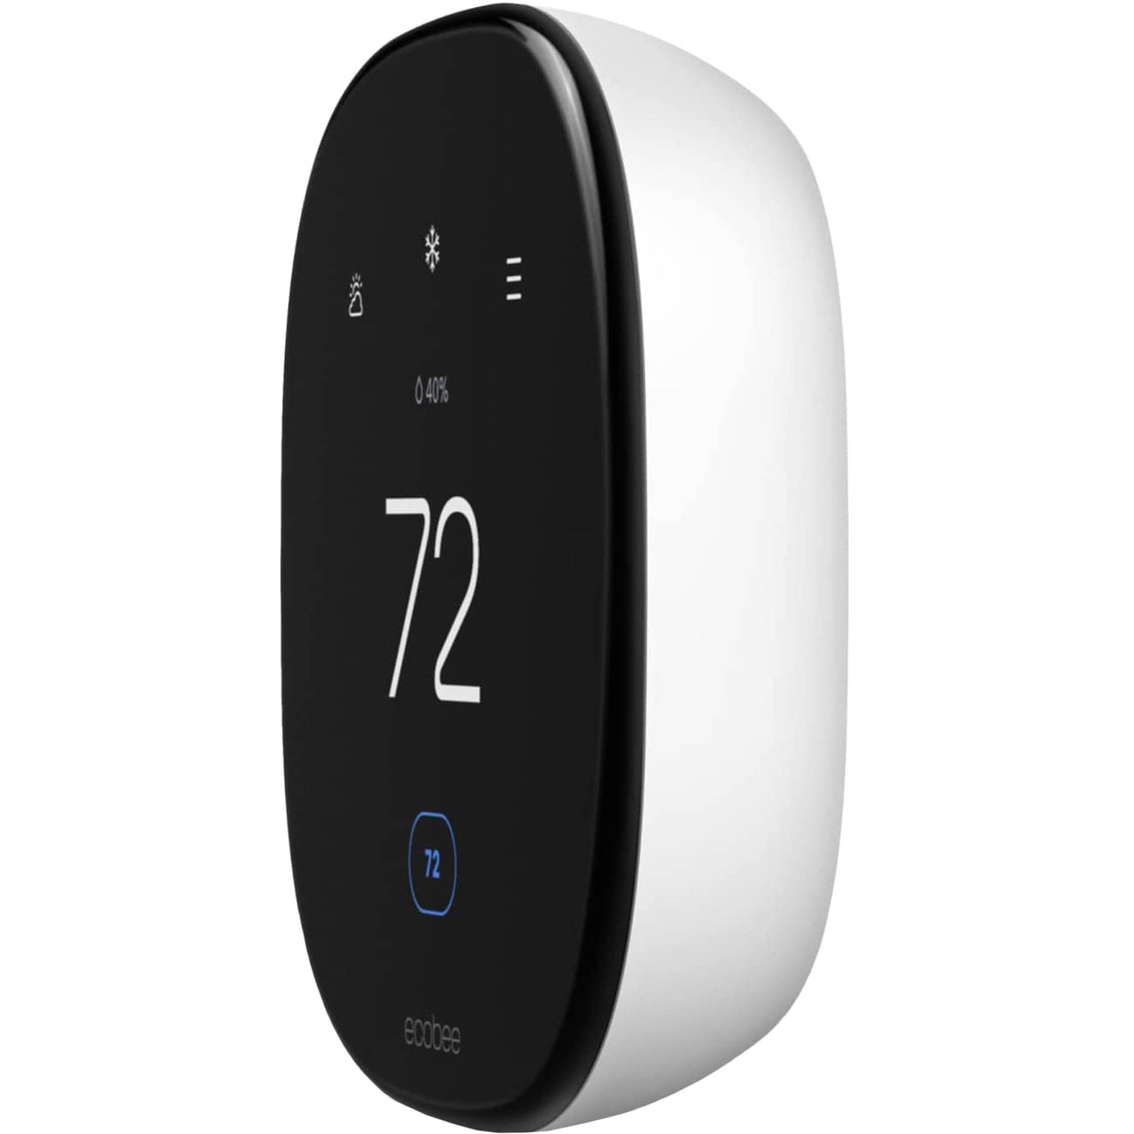 Ecobee Enhanced Smart Programmable Touch Screen WiFi Thermostat - Image 8 of 9